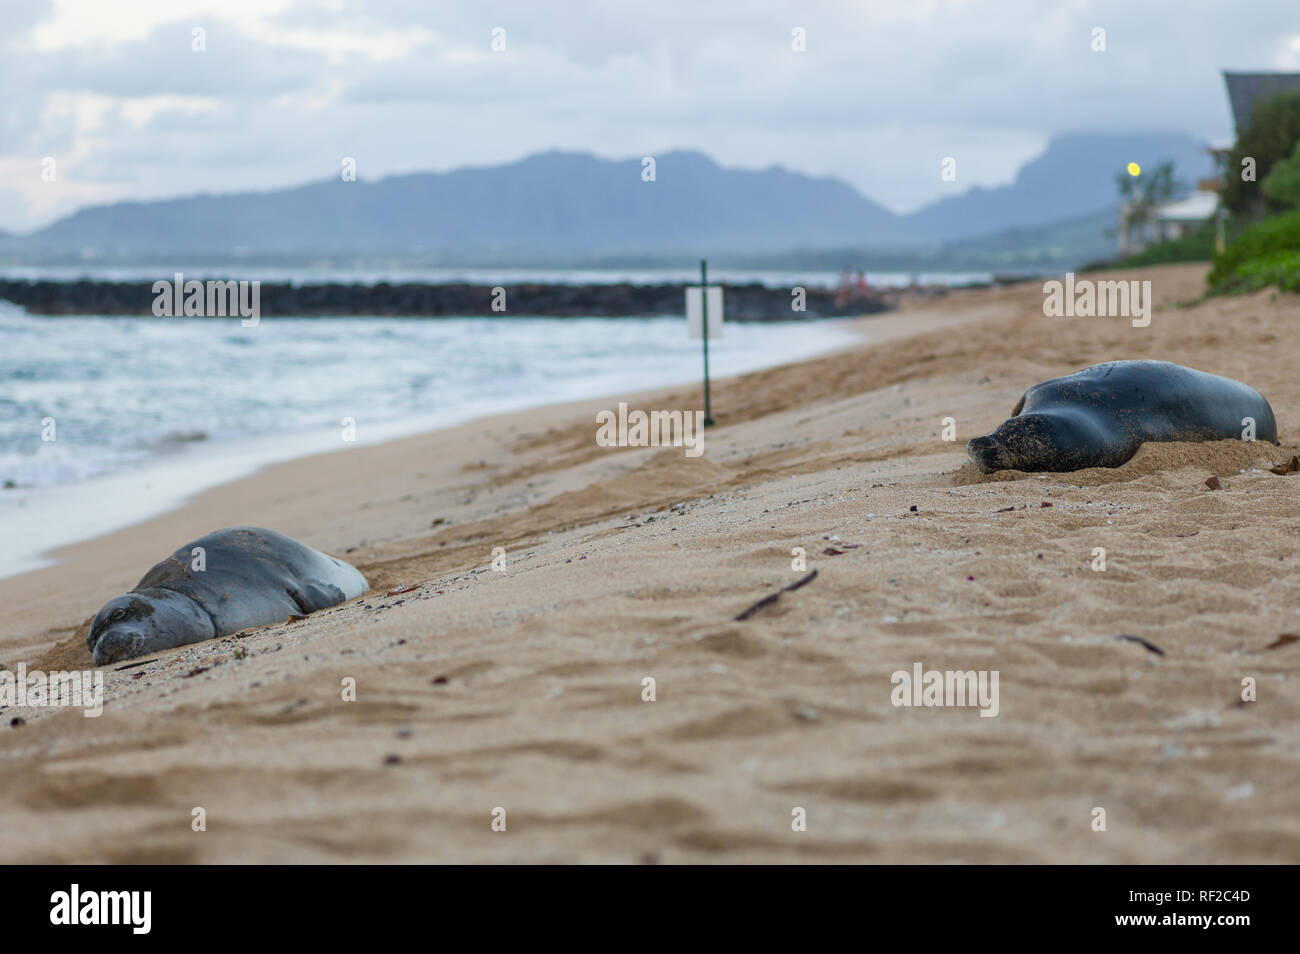 Hawaiian Monk Seals, Neomonachus schauinslandi, are endangered with just 1400 individuals in the wild. They frequently haul out on Kauai's beaches. Stock Photo